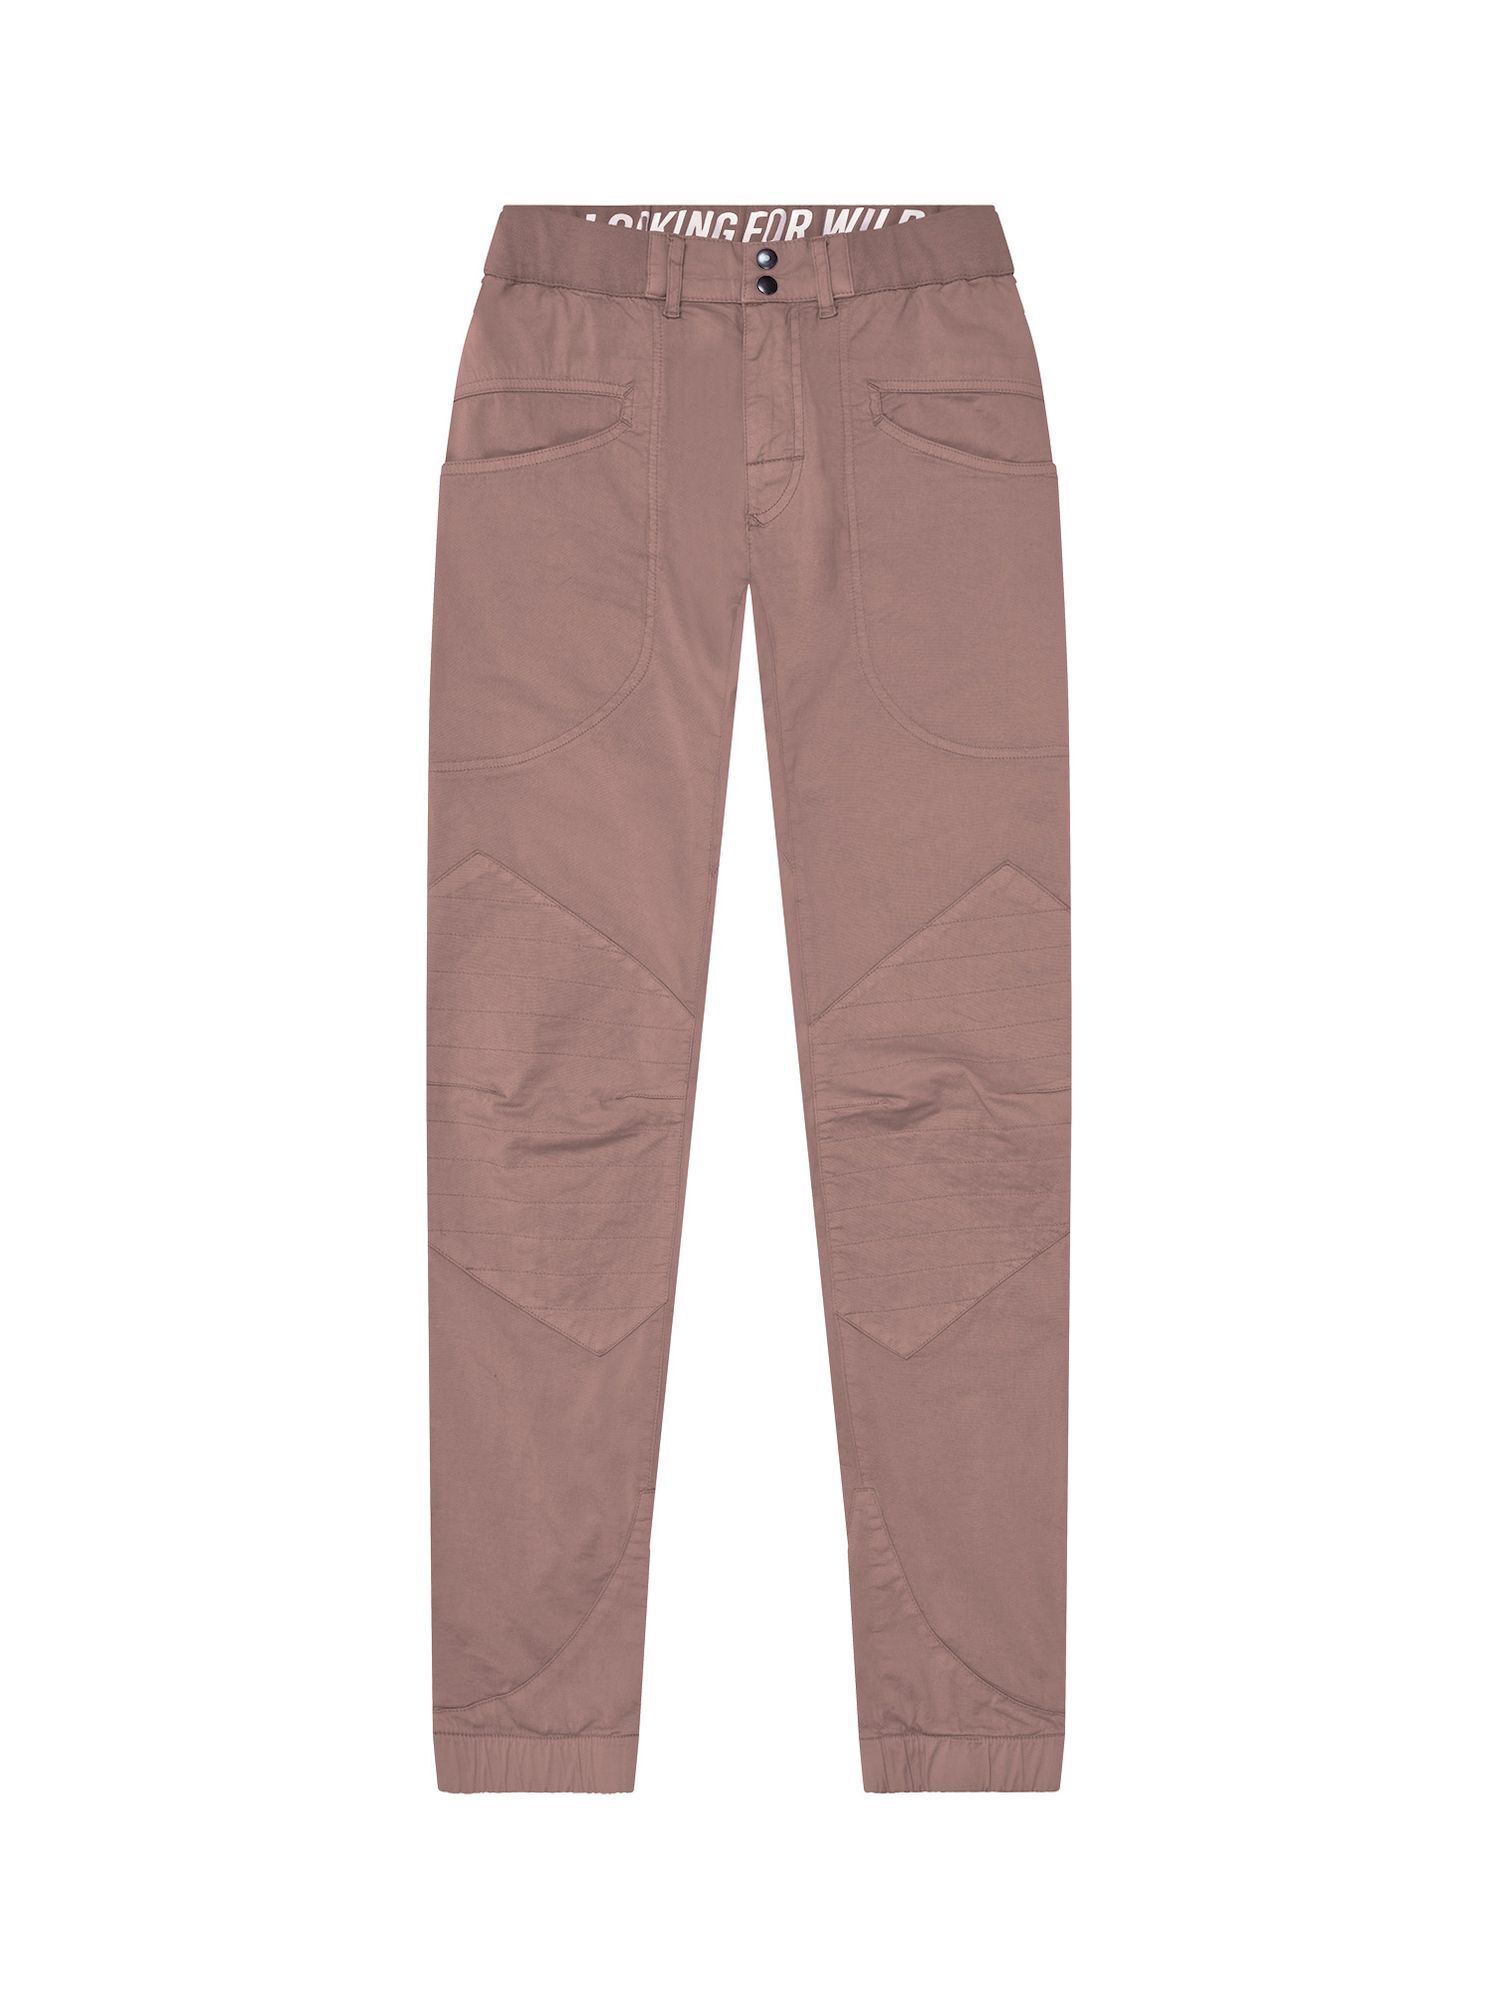 Looking For Wild Fitz Roy Pant - Pantalon escalade homme | Hardloop